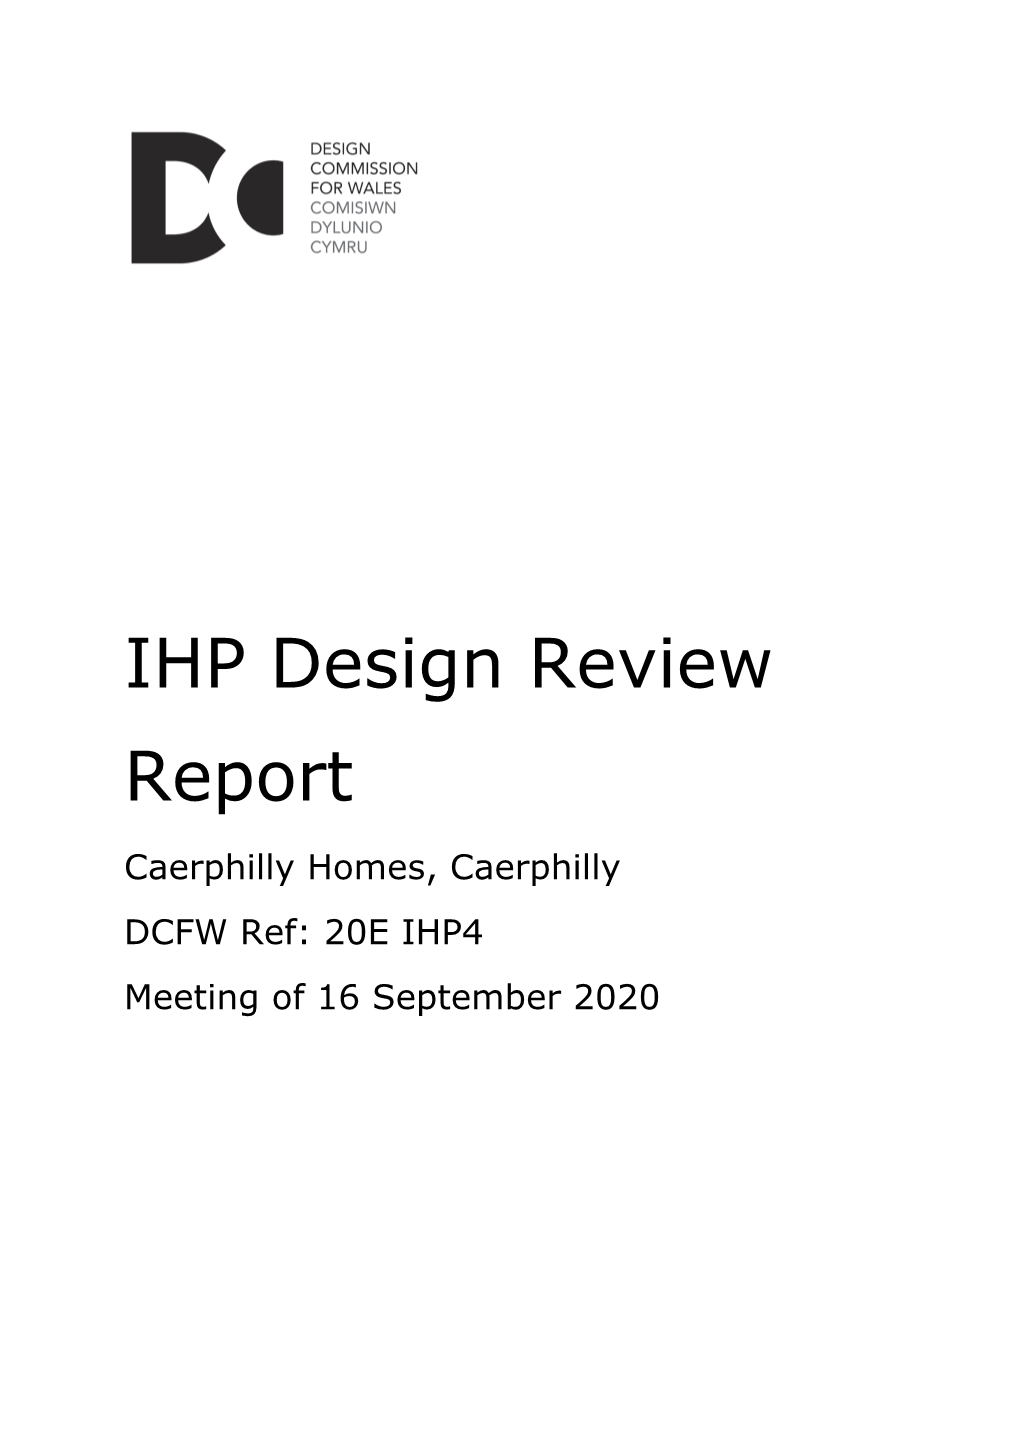 IHP Design Review Report Caerphilly Homes, Caerphilly DCFW Ref: 20E IHP4